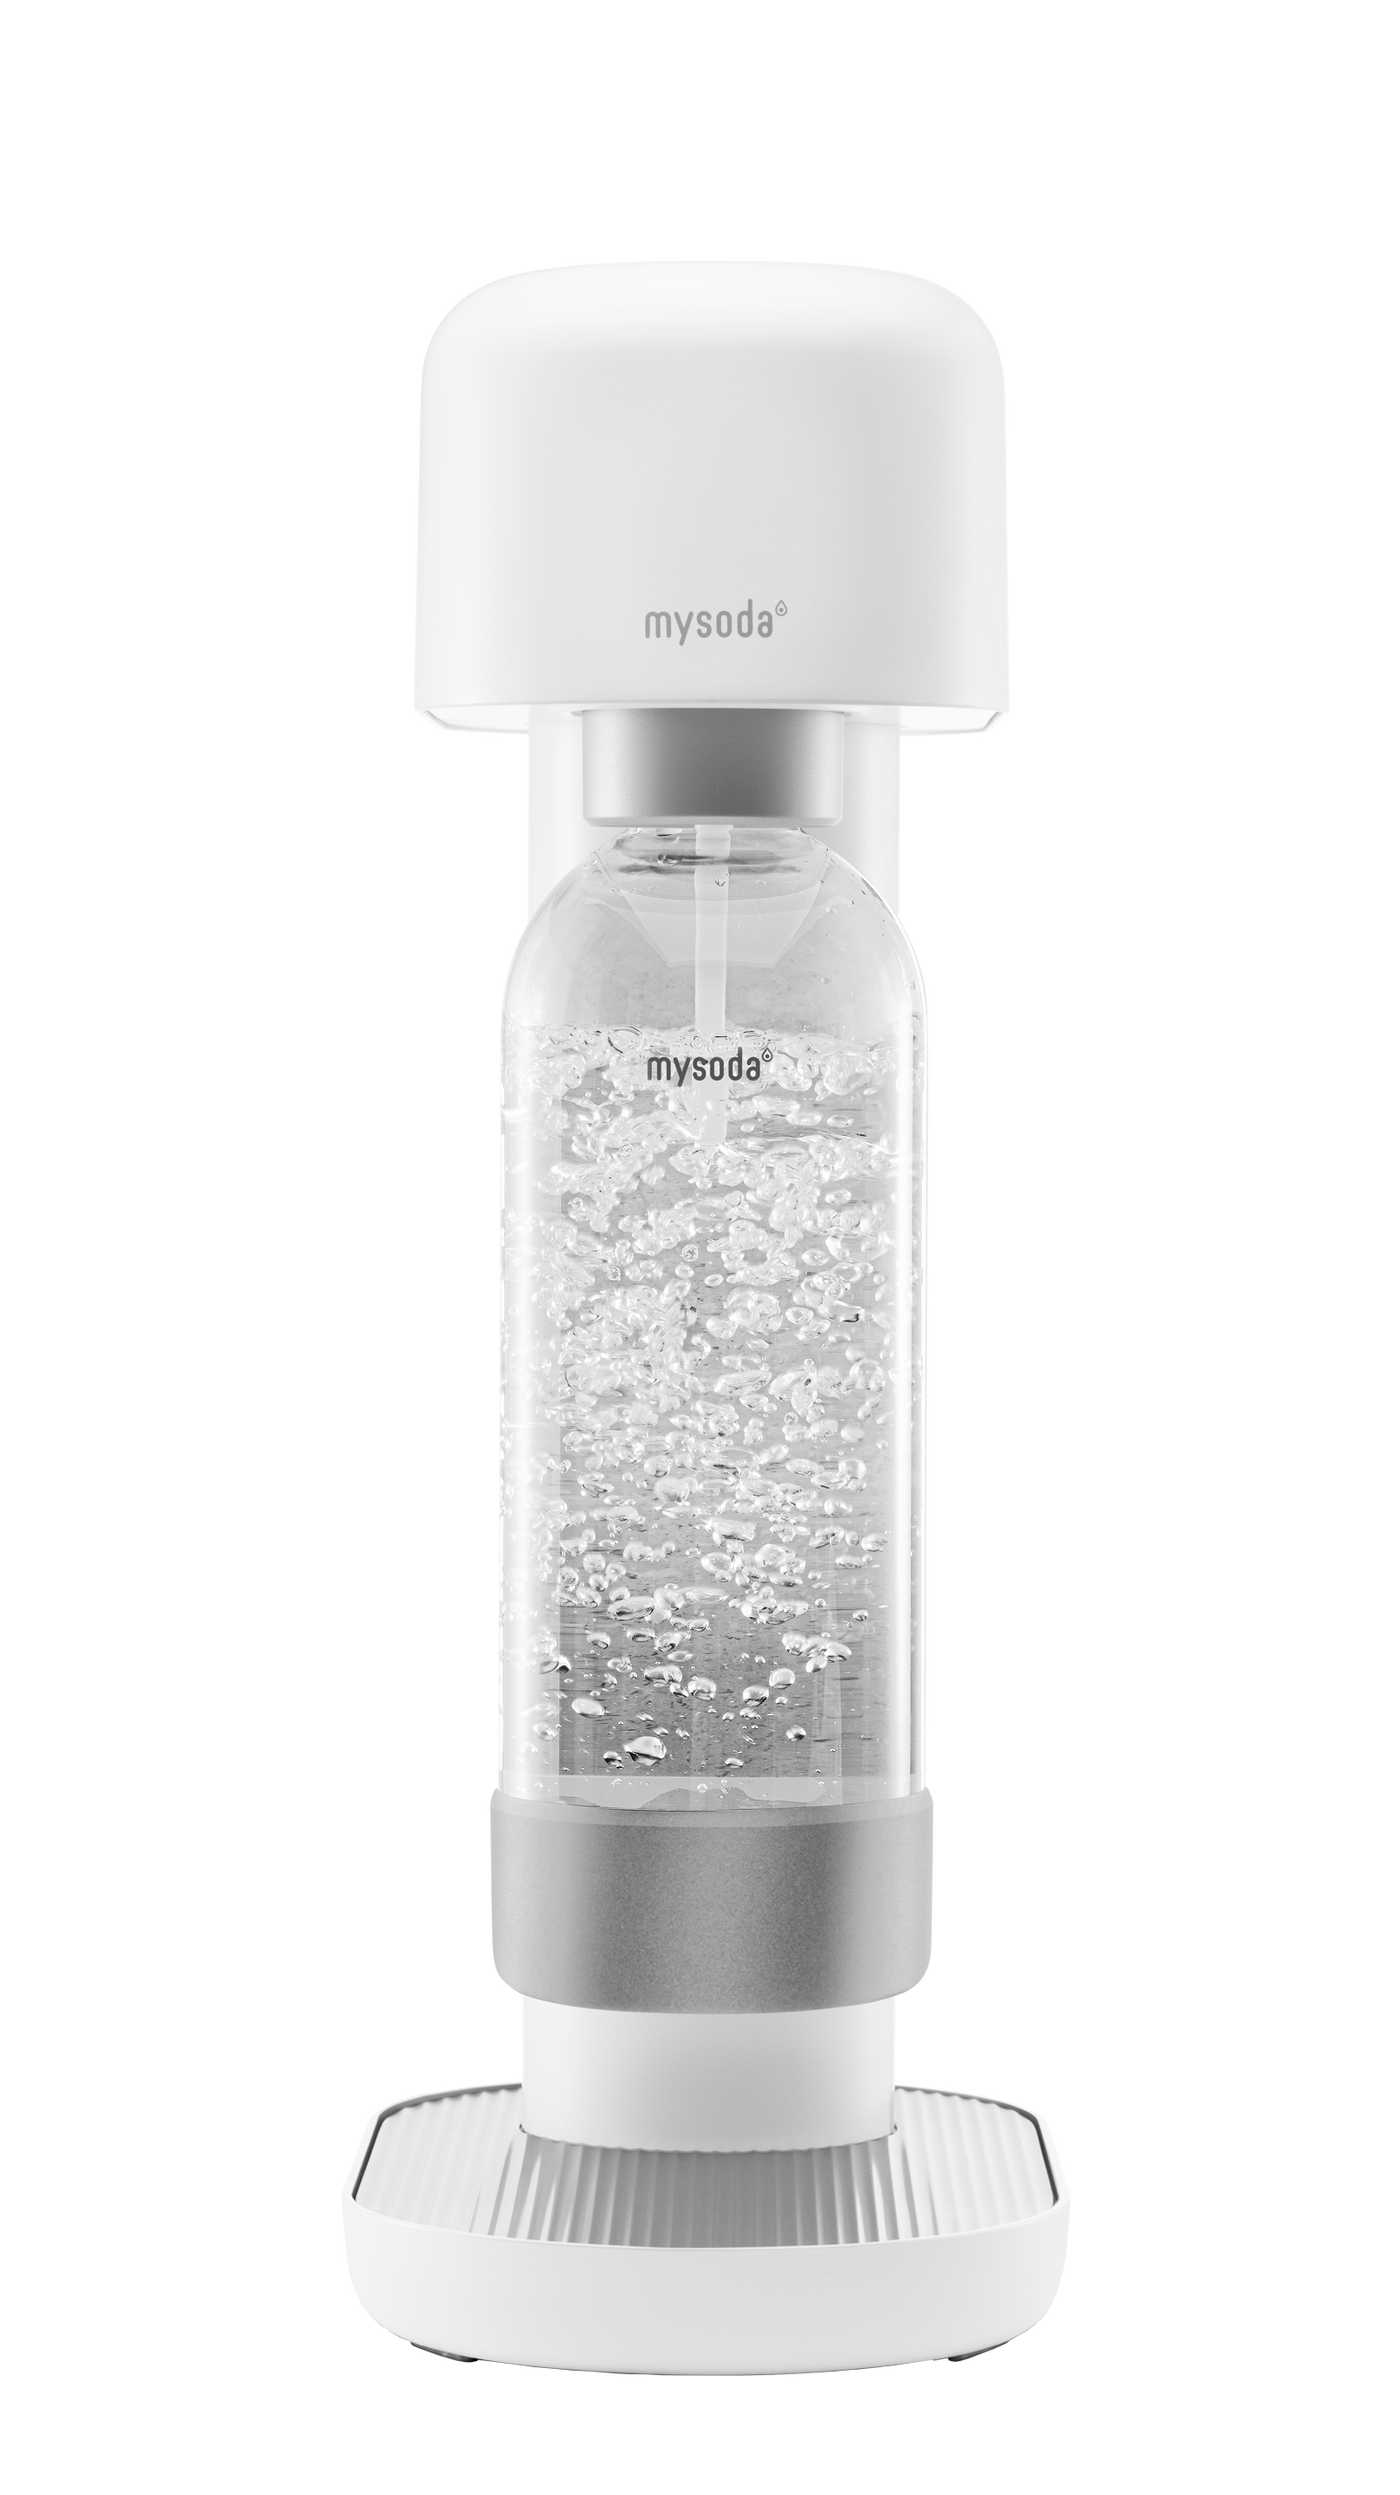 White Mysoda Ruby sparkling water maker viewed from the front